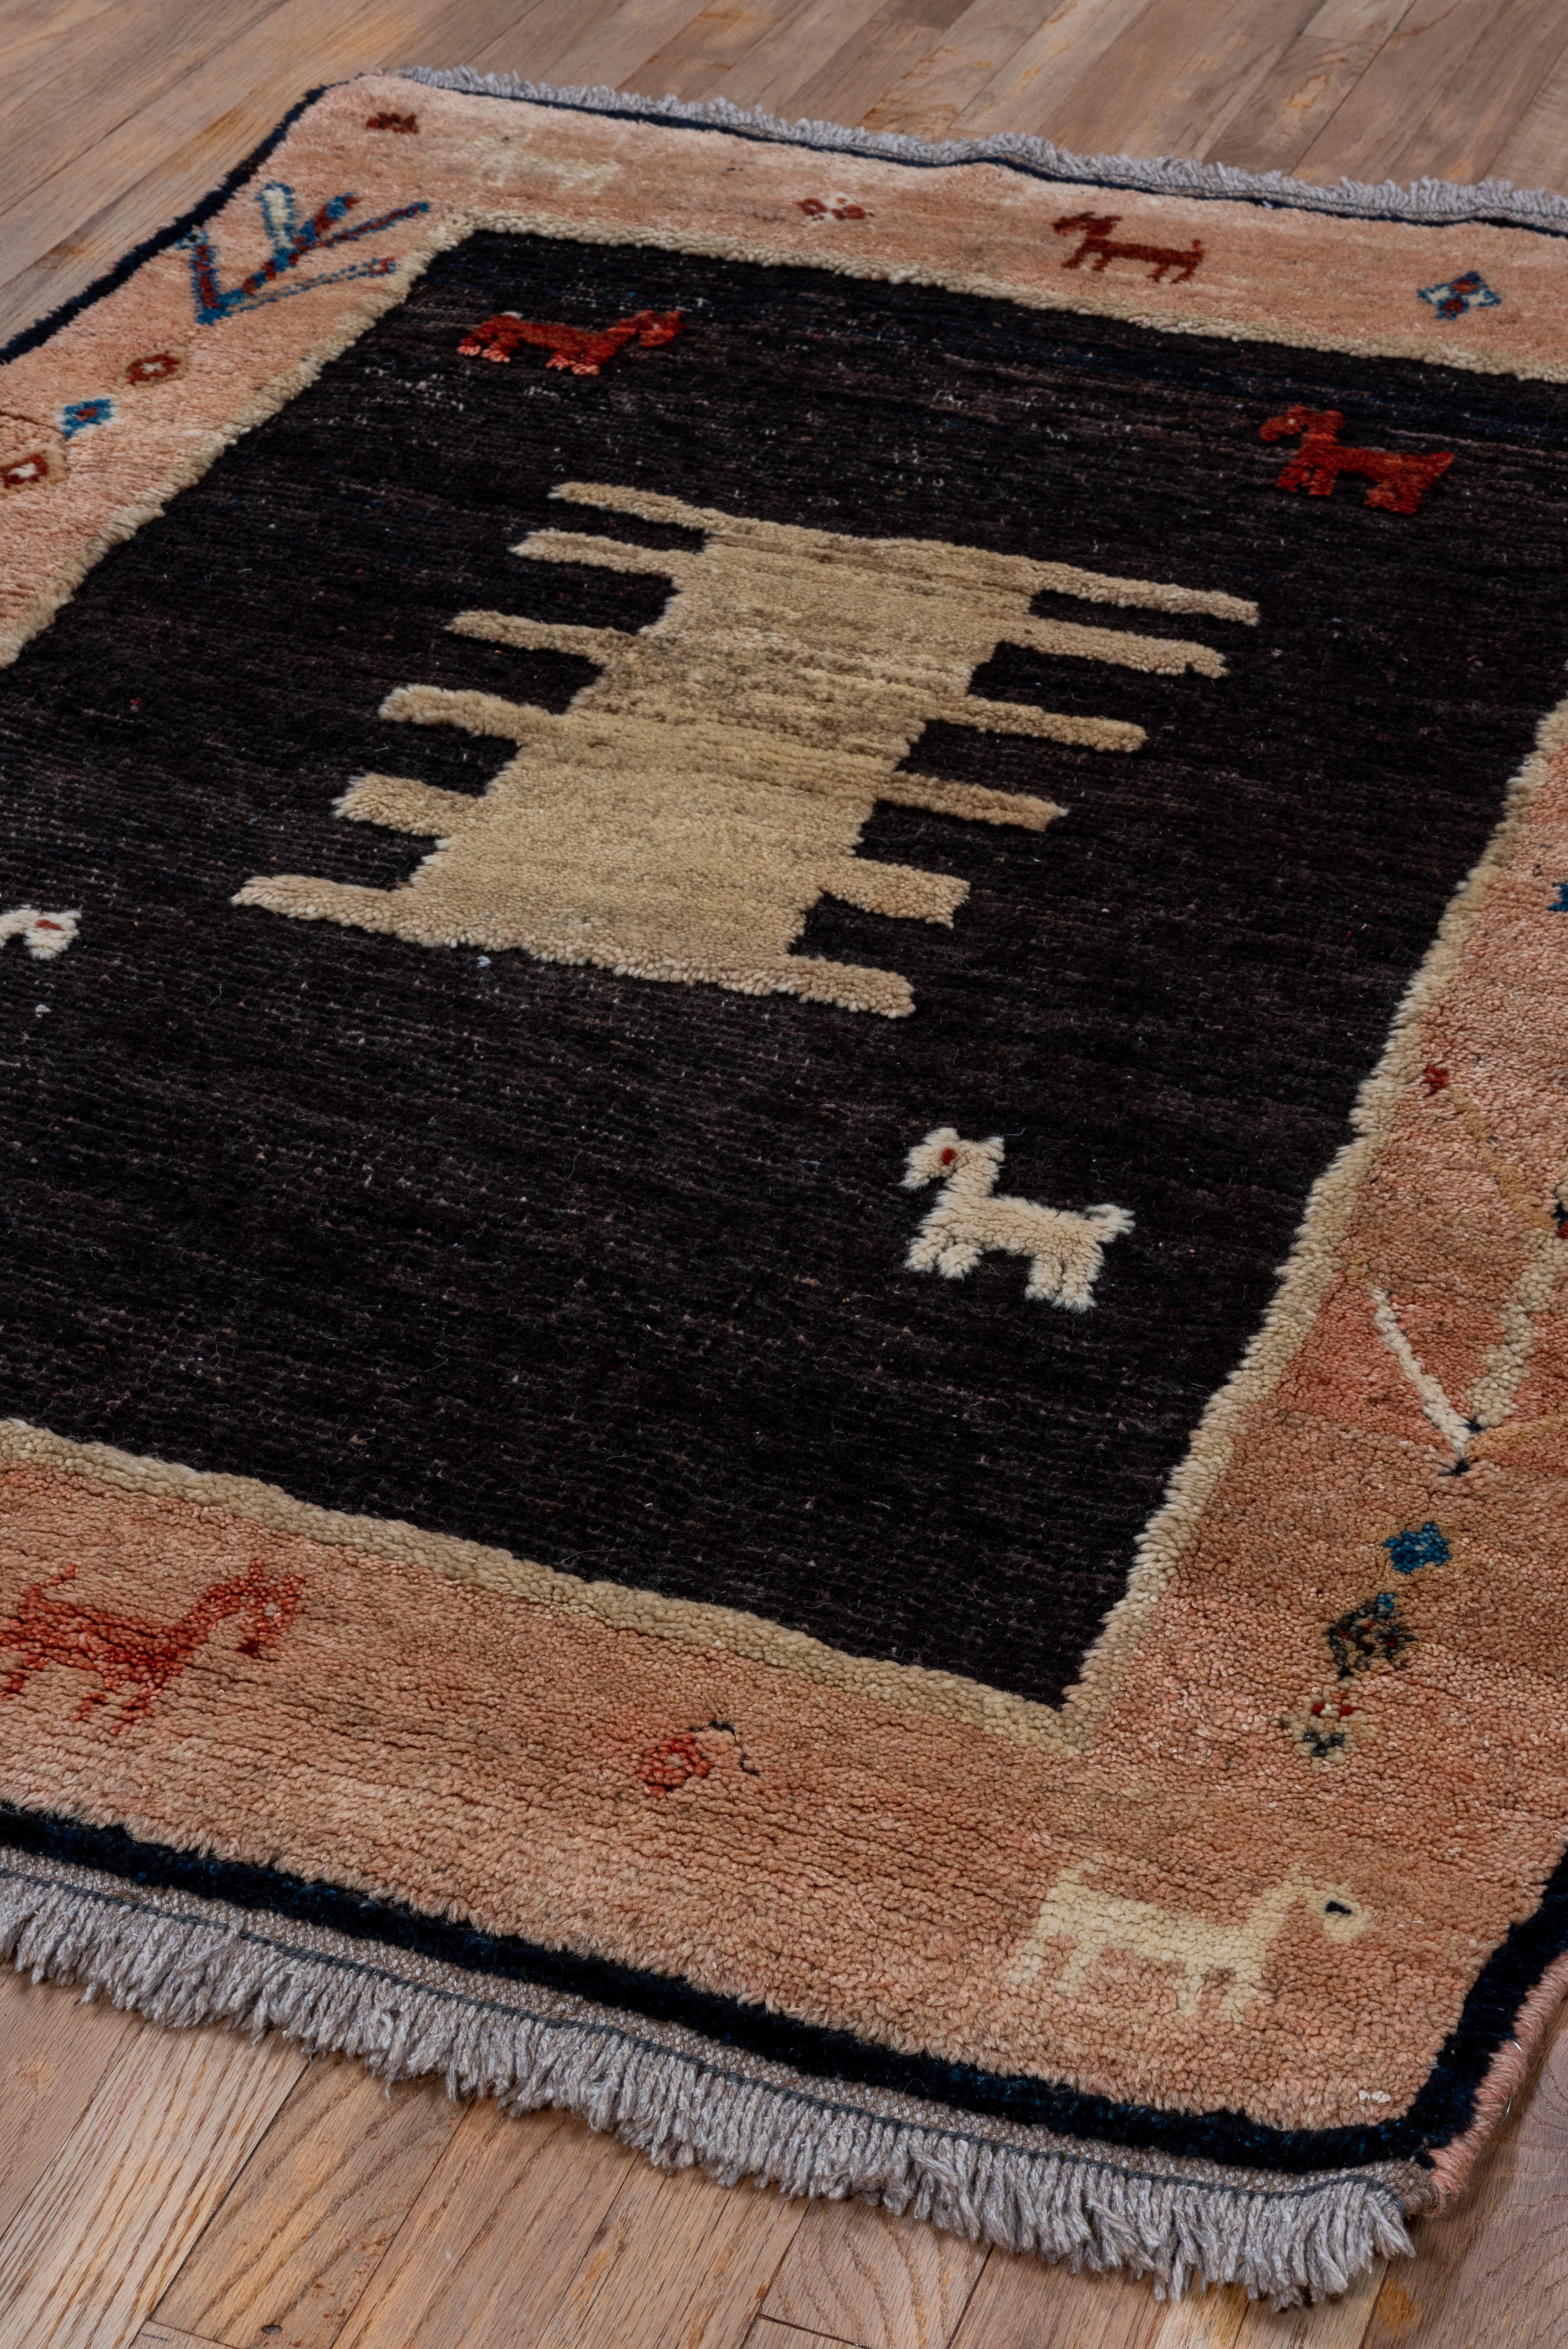 Mid-20th Century Pictorial Persian Gabbeh Rug, Charcoal Field, Peach Borders In Good Condition For Sale In New York, NY